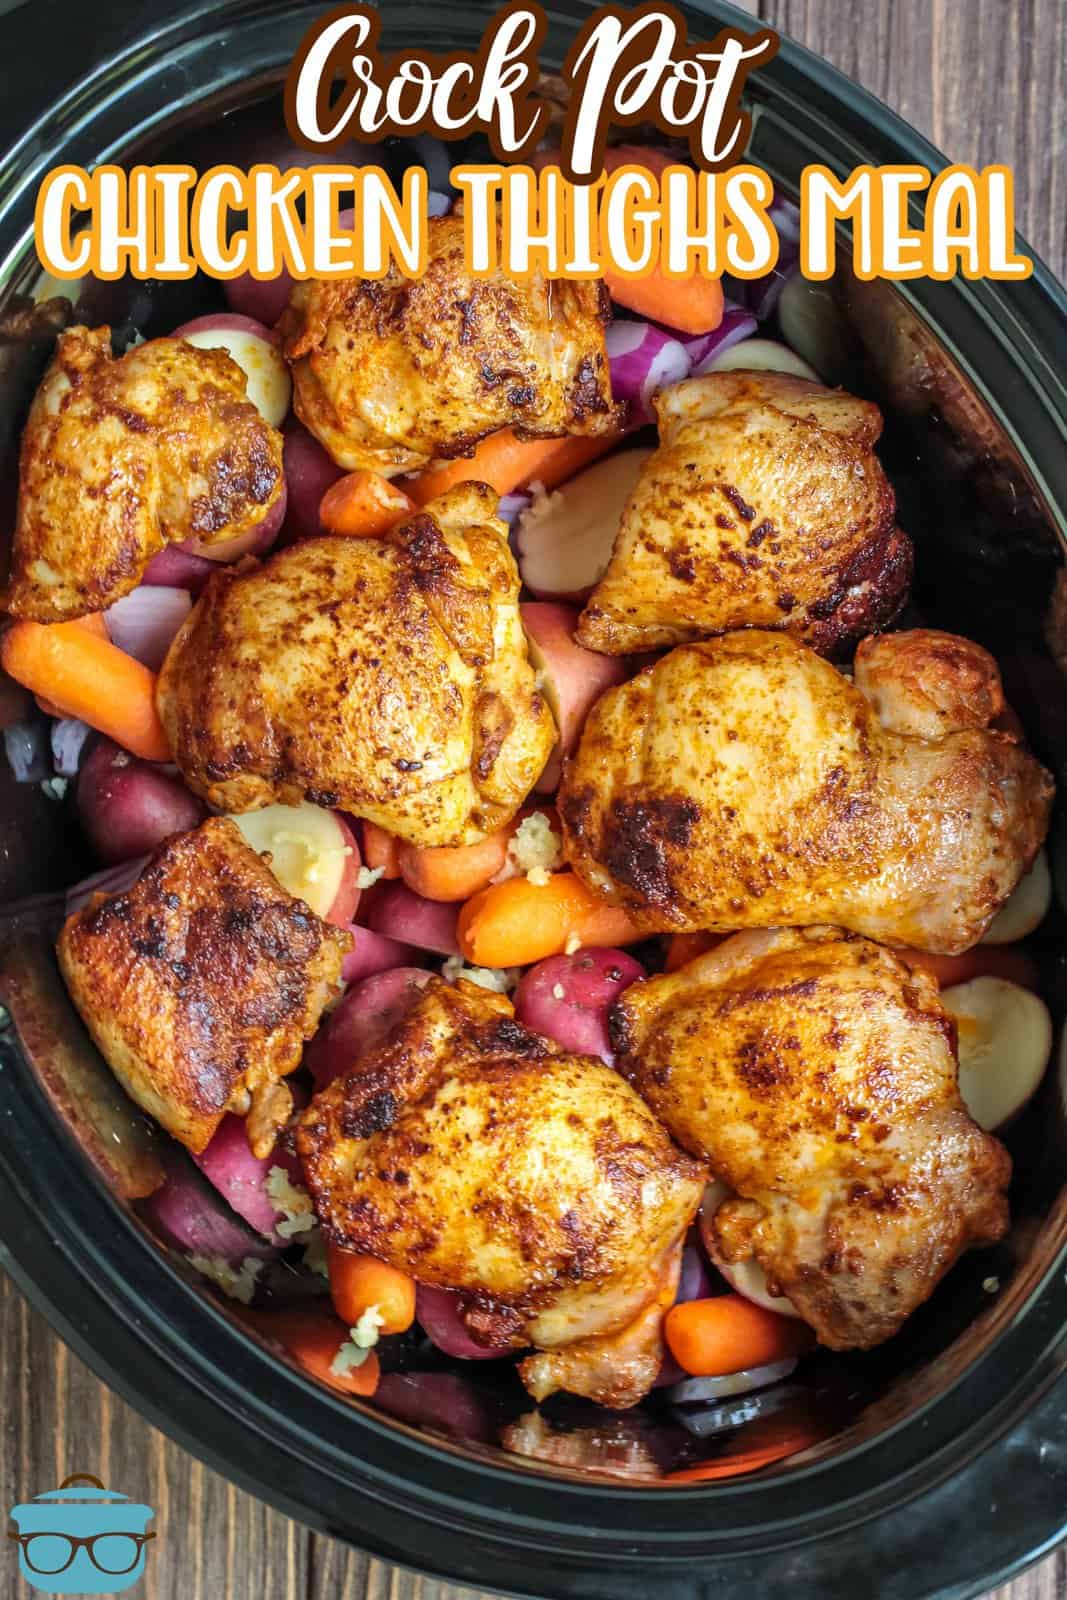 Pinterest image of Slow Cooker Chicken Thigh Meal in crockpot.